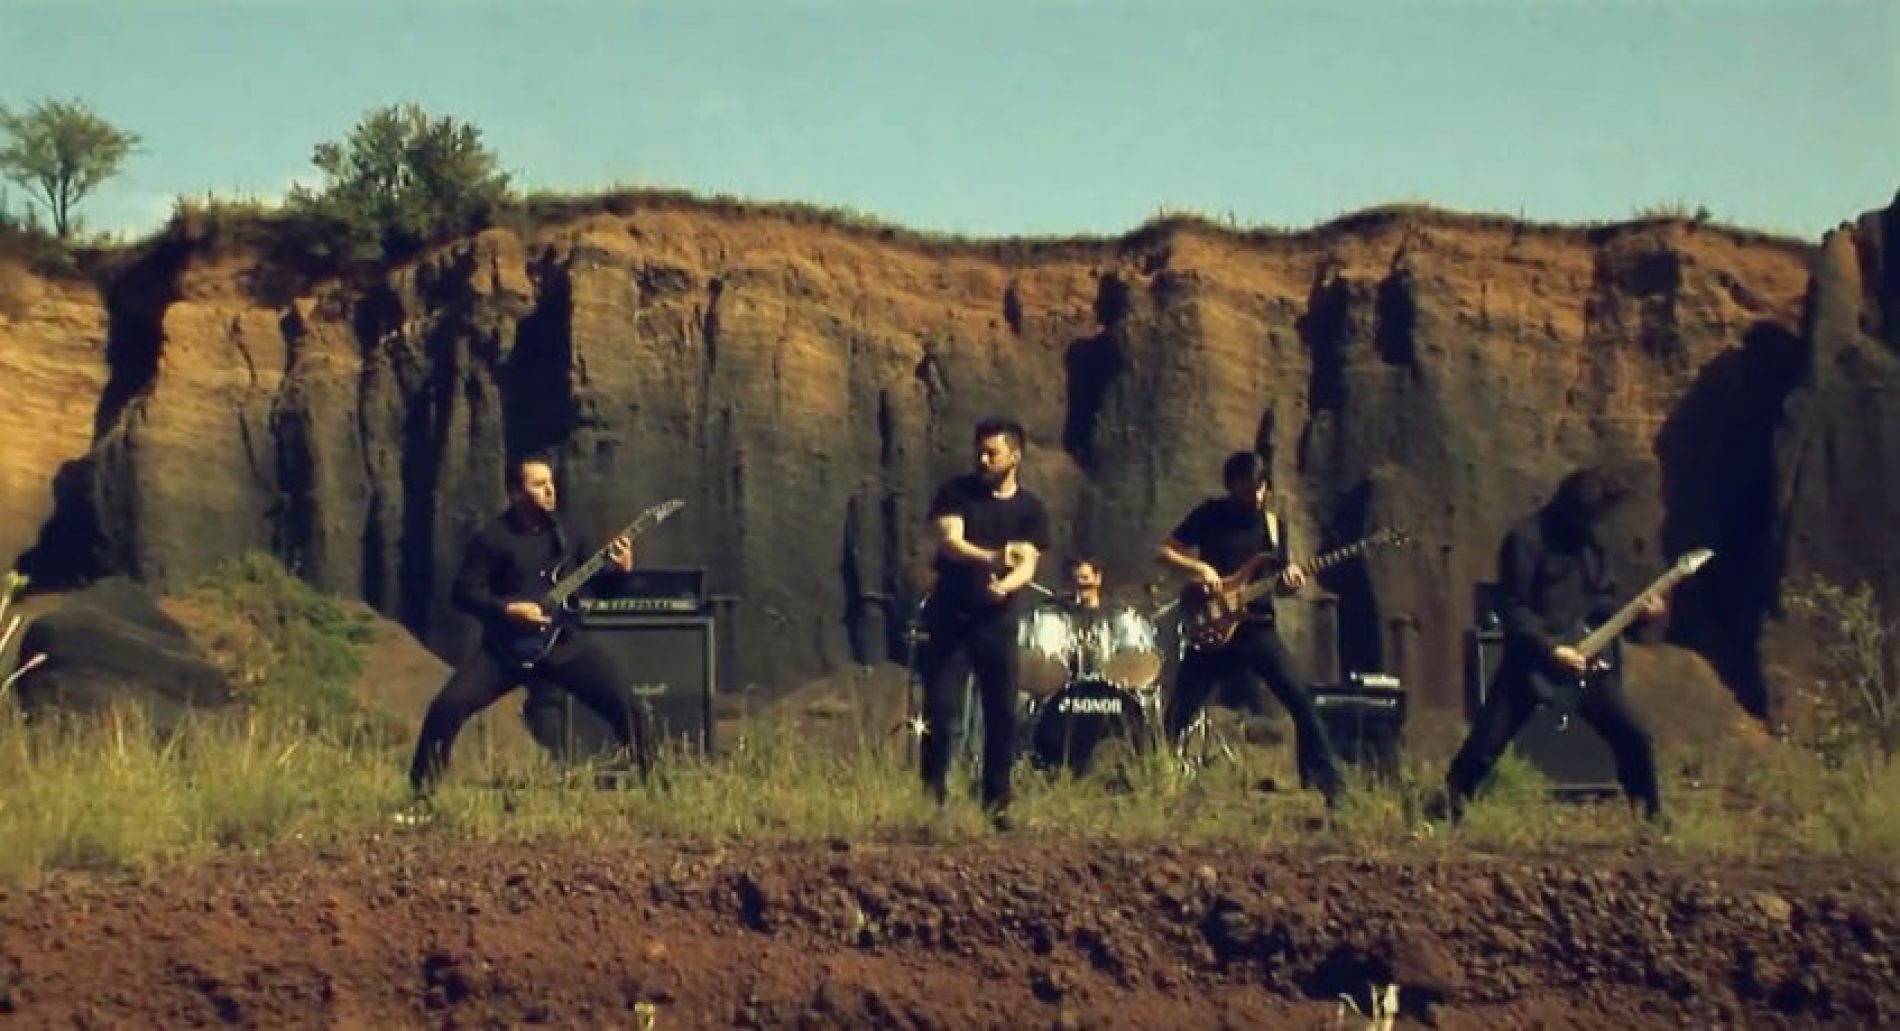 Deliver The God – Under The Wings Of Our Wicked Sun (primul videoclip oficial)